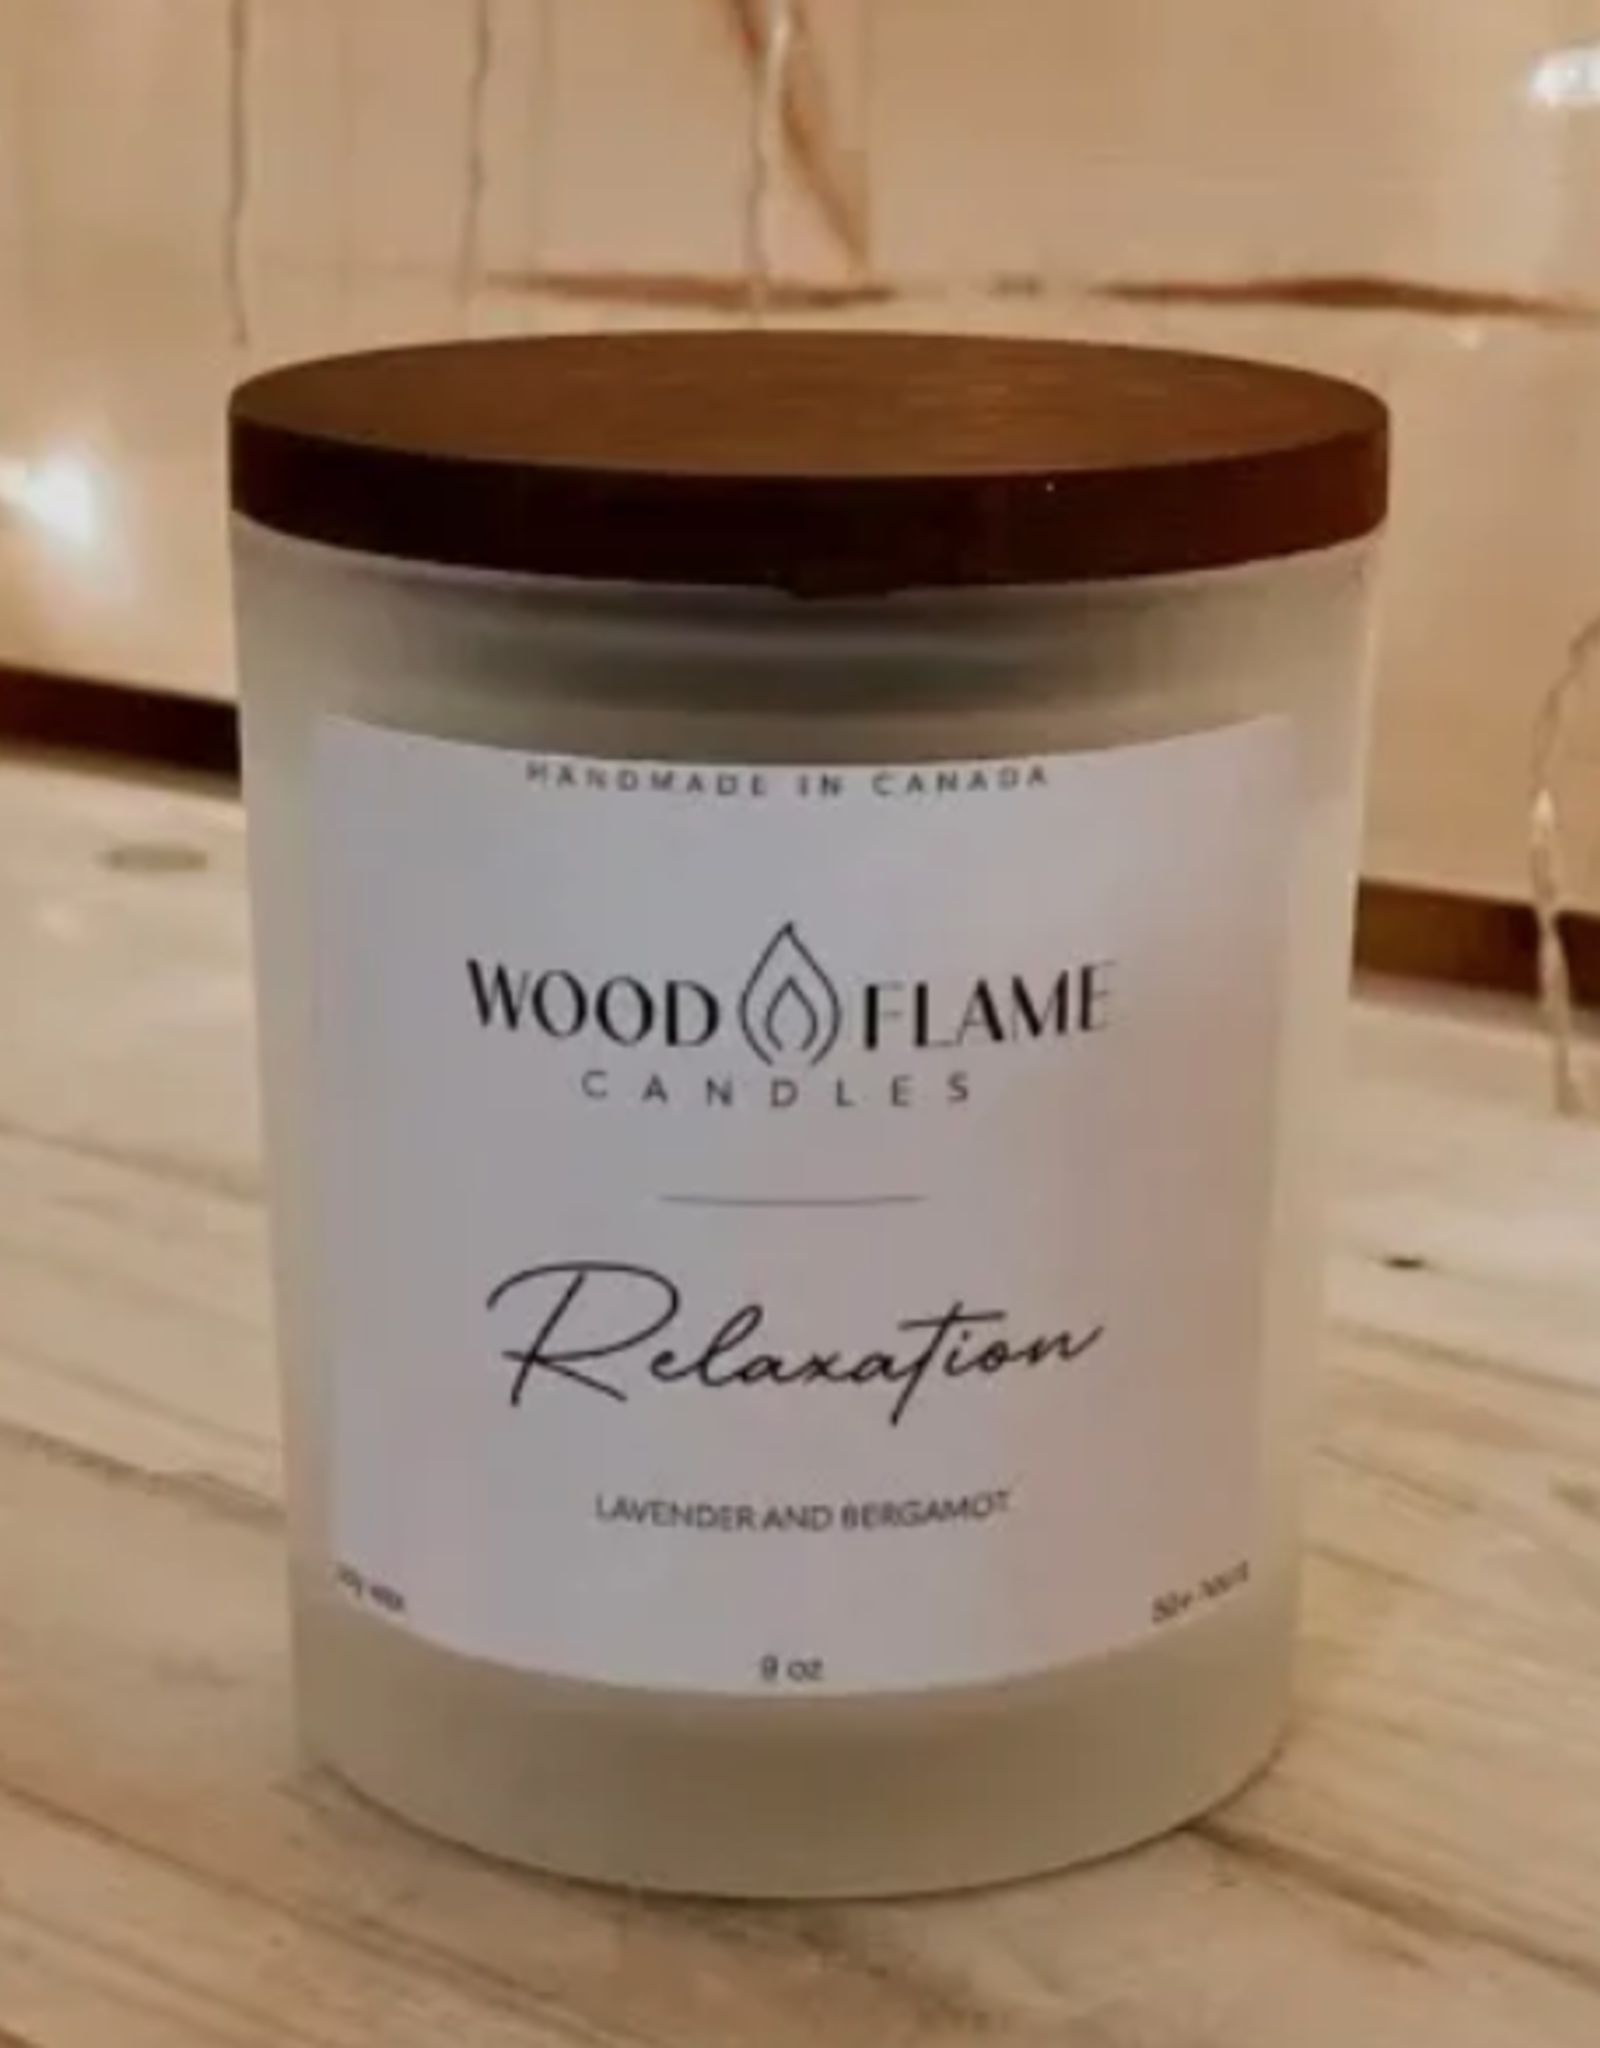 Wood Flame Candles WFC Relaxation 9oz